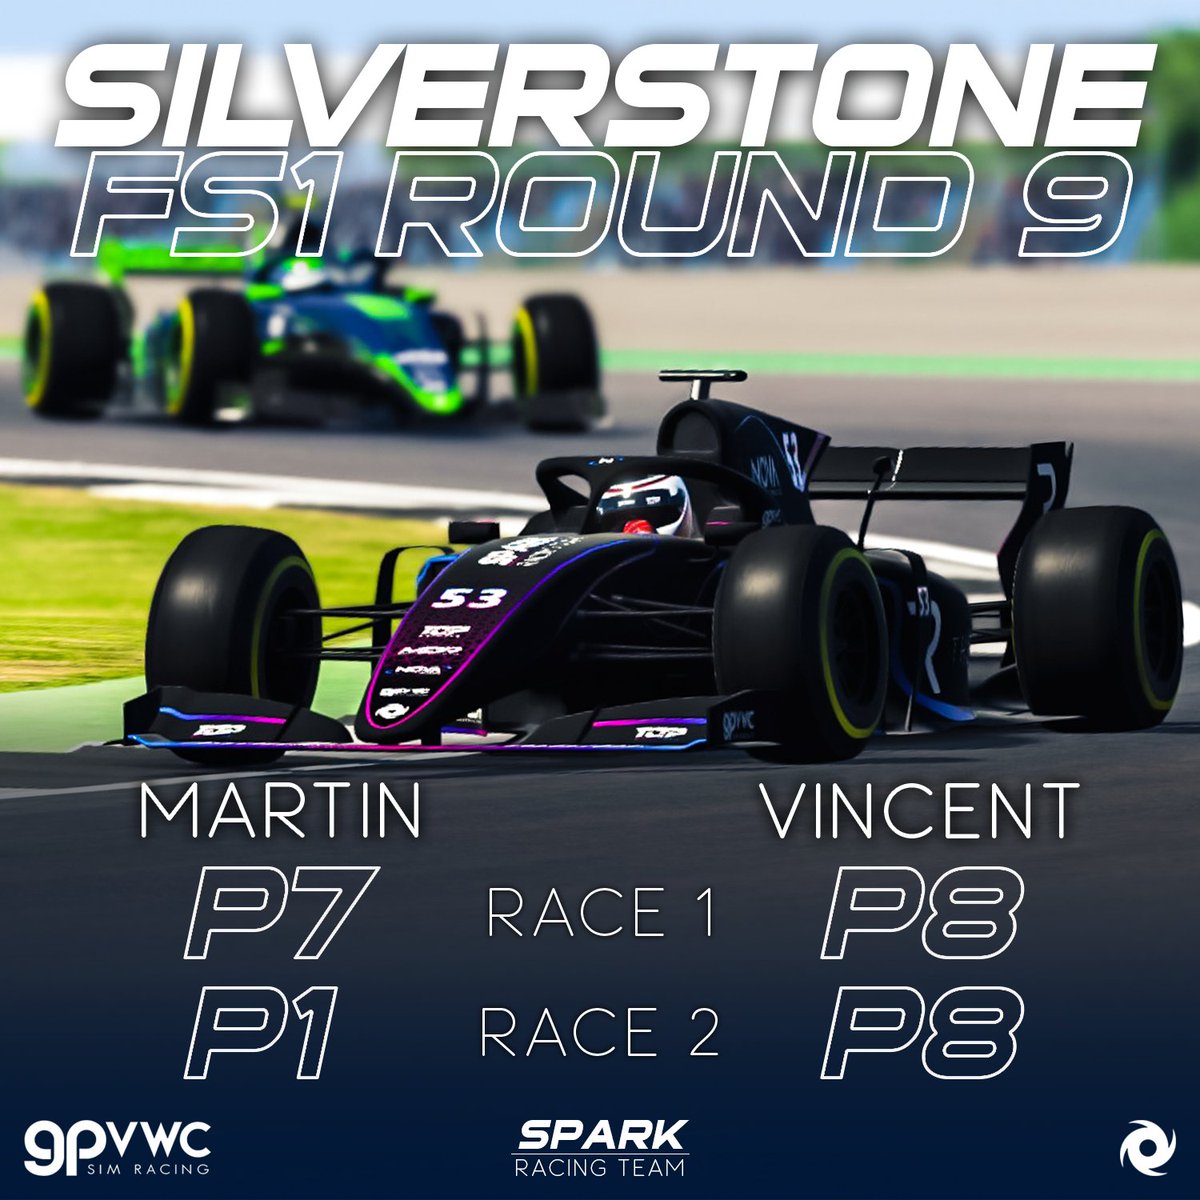 For this round we ran the last year's @NovaSimracing livery for our engineer Josh. Martin, who stood in for Tom, drove brilliant in race 2 and won. We hope we made him proud with these results.😉 #gpvwc #FS1 #simracing #esports #BritishGrandPrix #britishGP